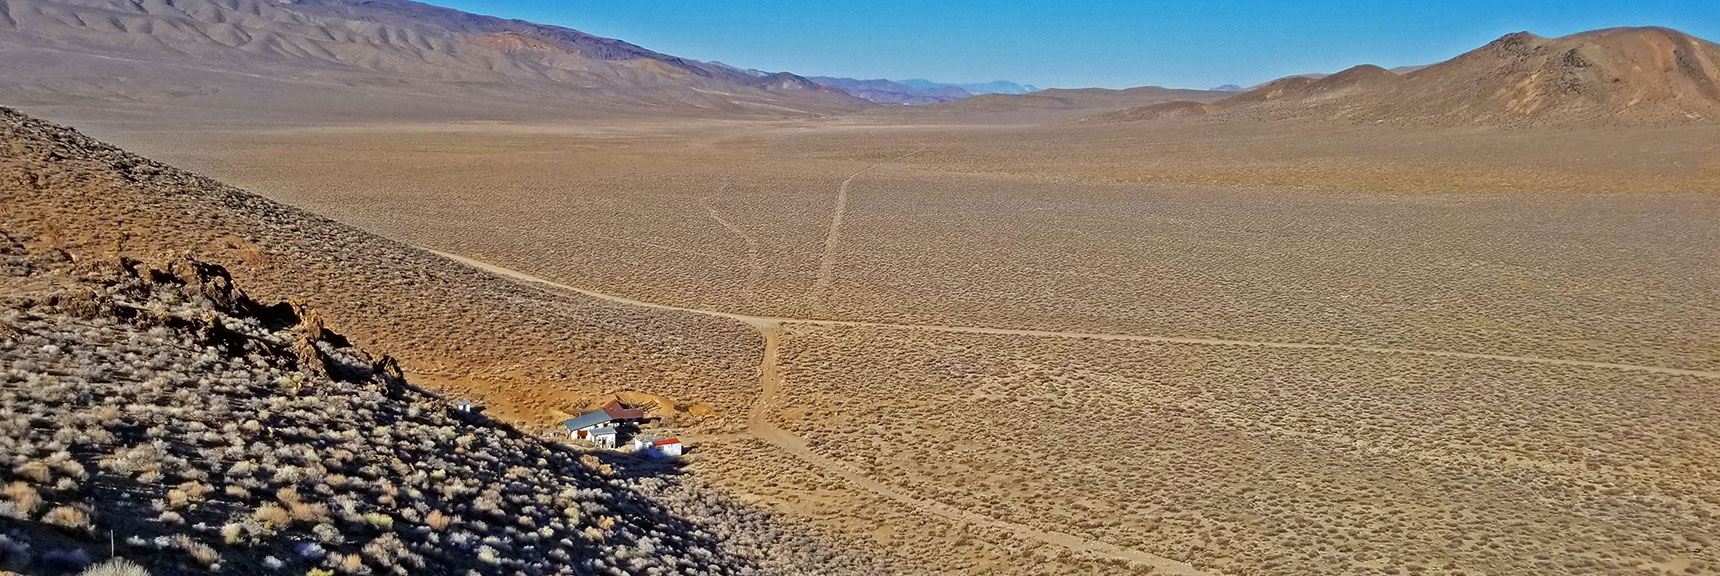 Pete Aguereberry's Cabins from Top of Providence Ridge. Old Approach Roads Still Visible | Eureka Mine, Harrisburg, Cashier Mill, Death Valley, California